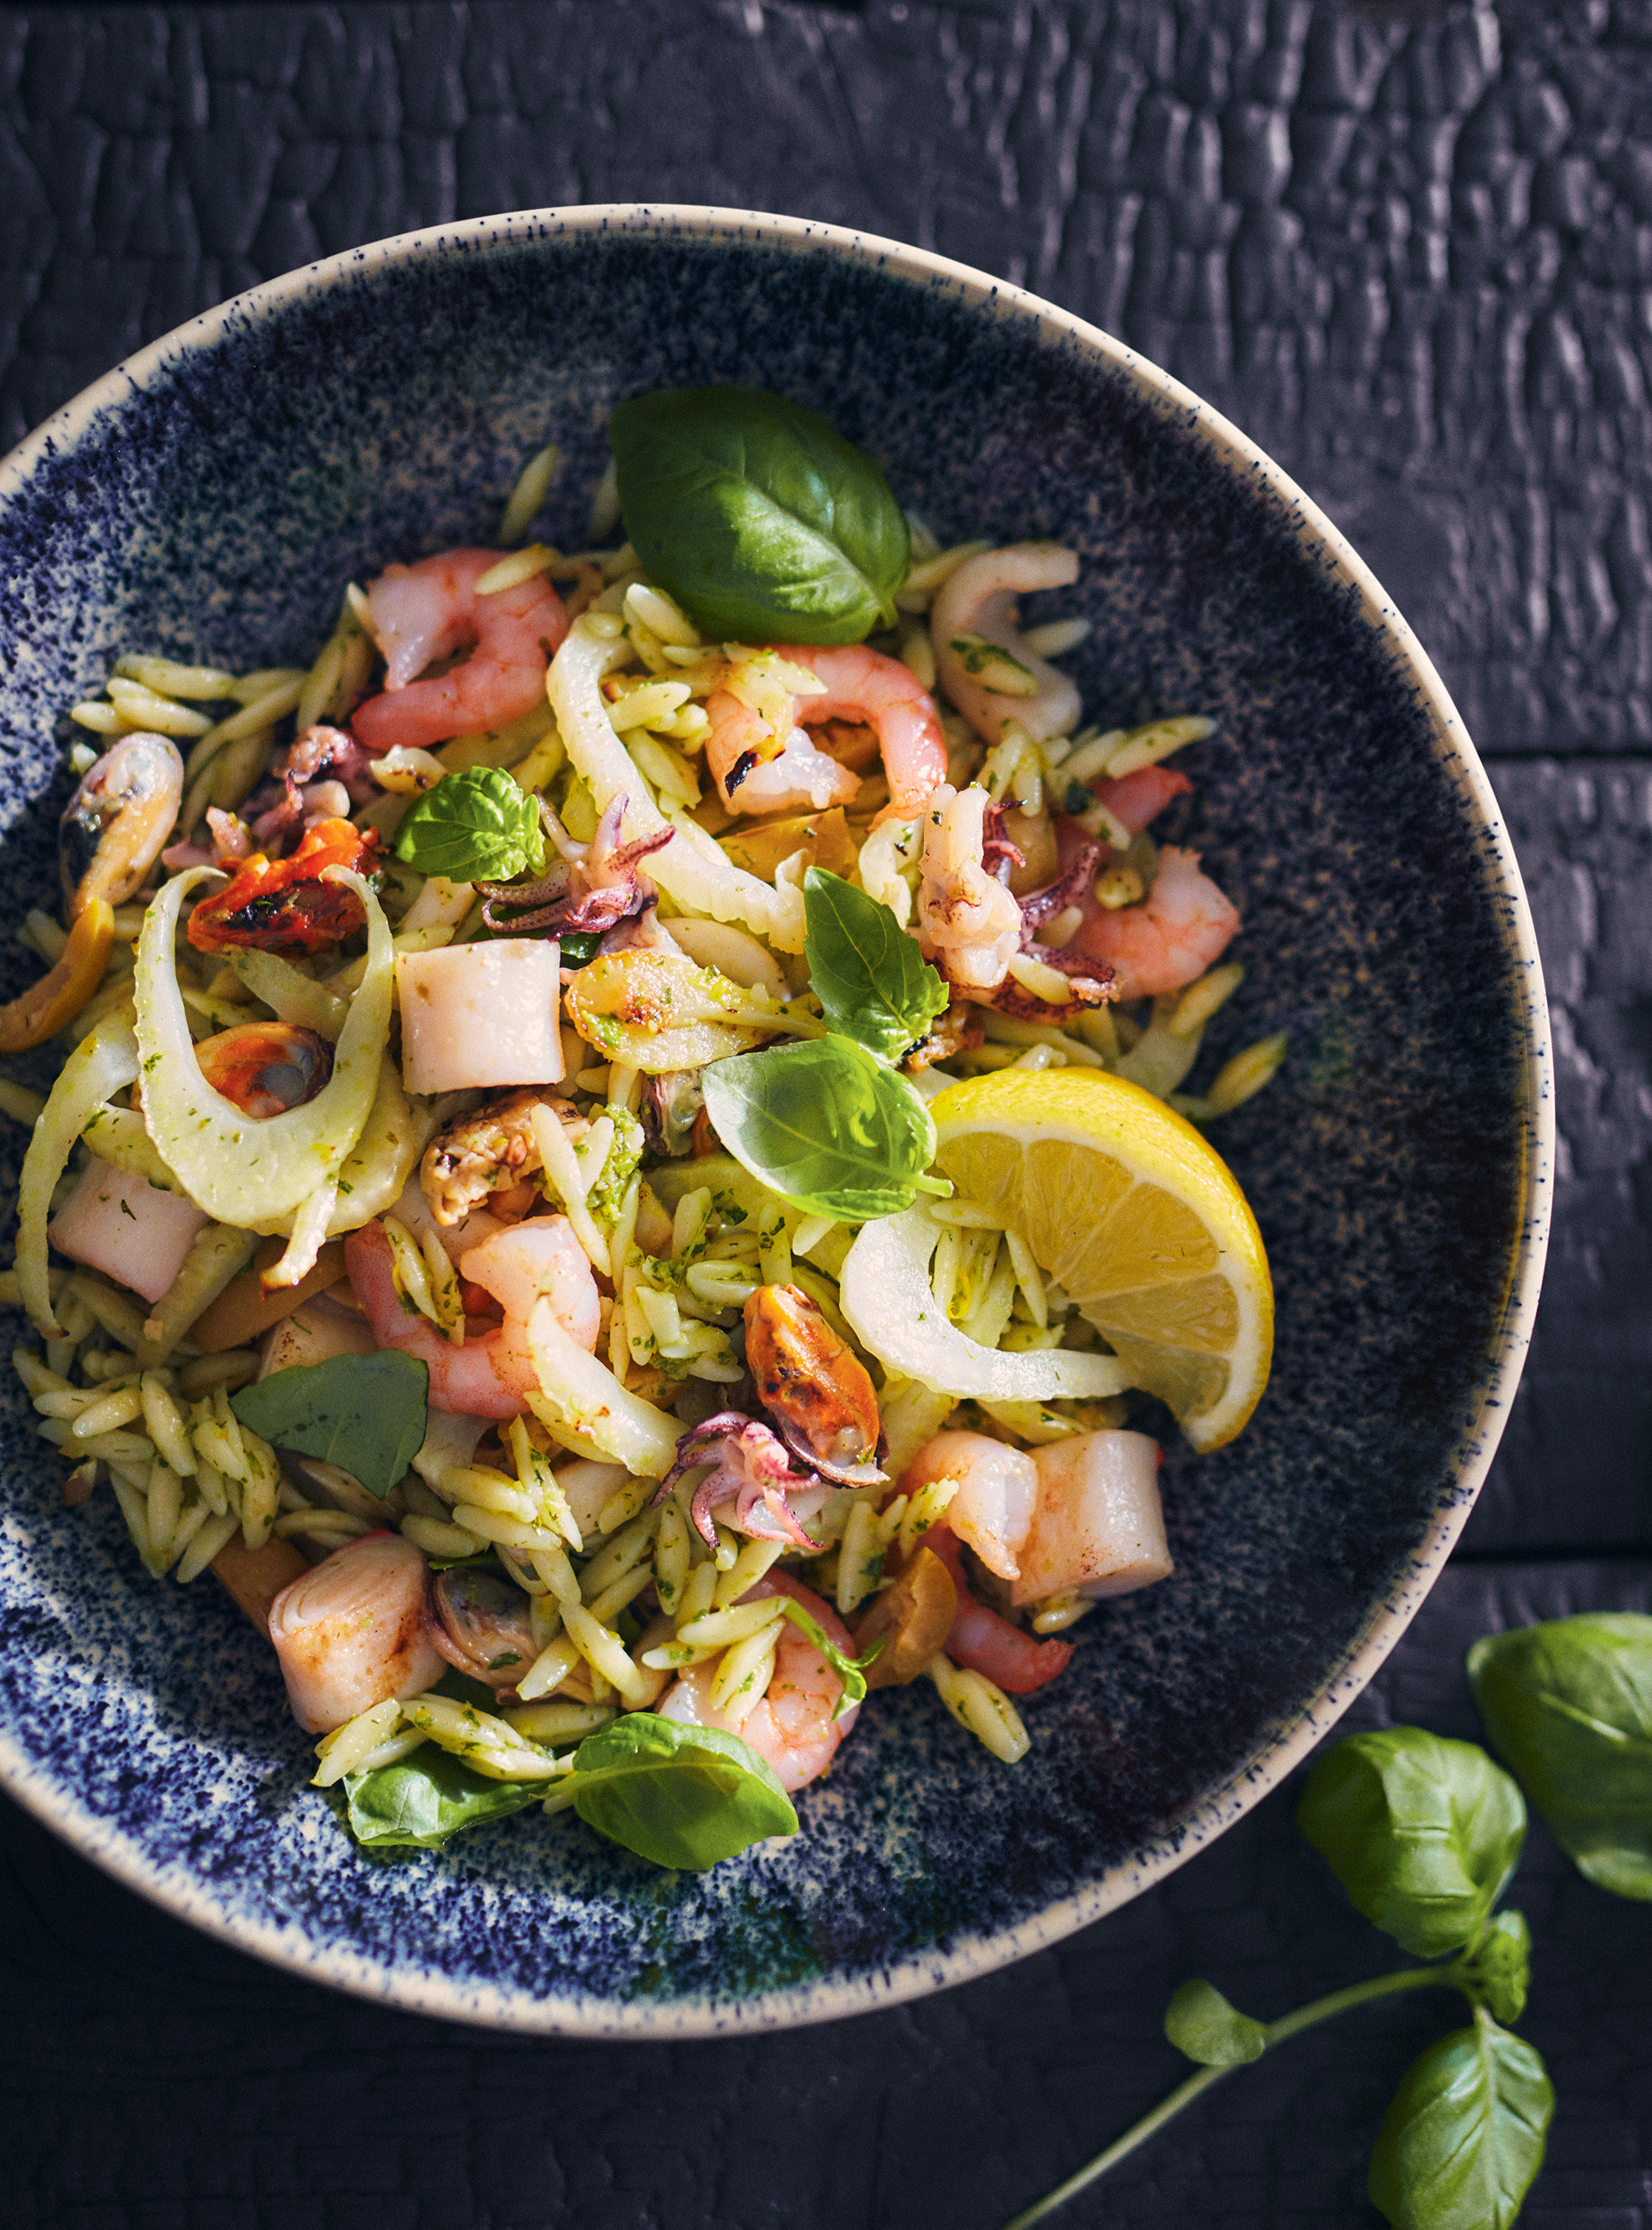 Orzo and Grilled Seafood Salad